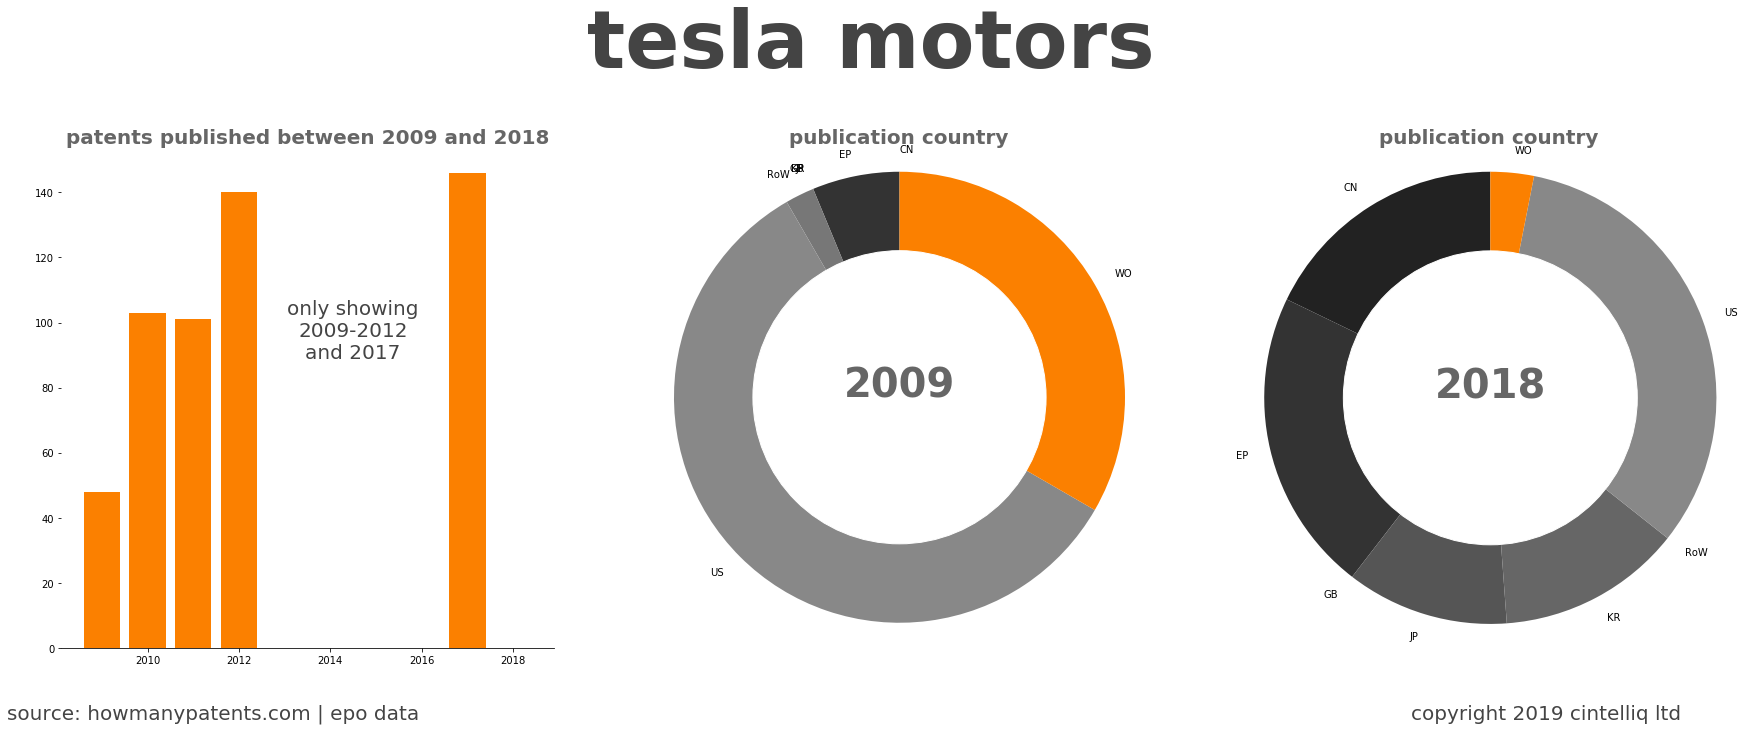 summary of patents for Tesla Motors